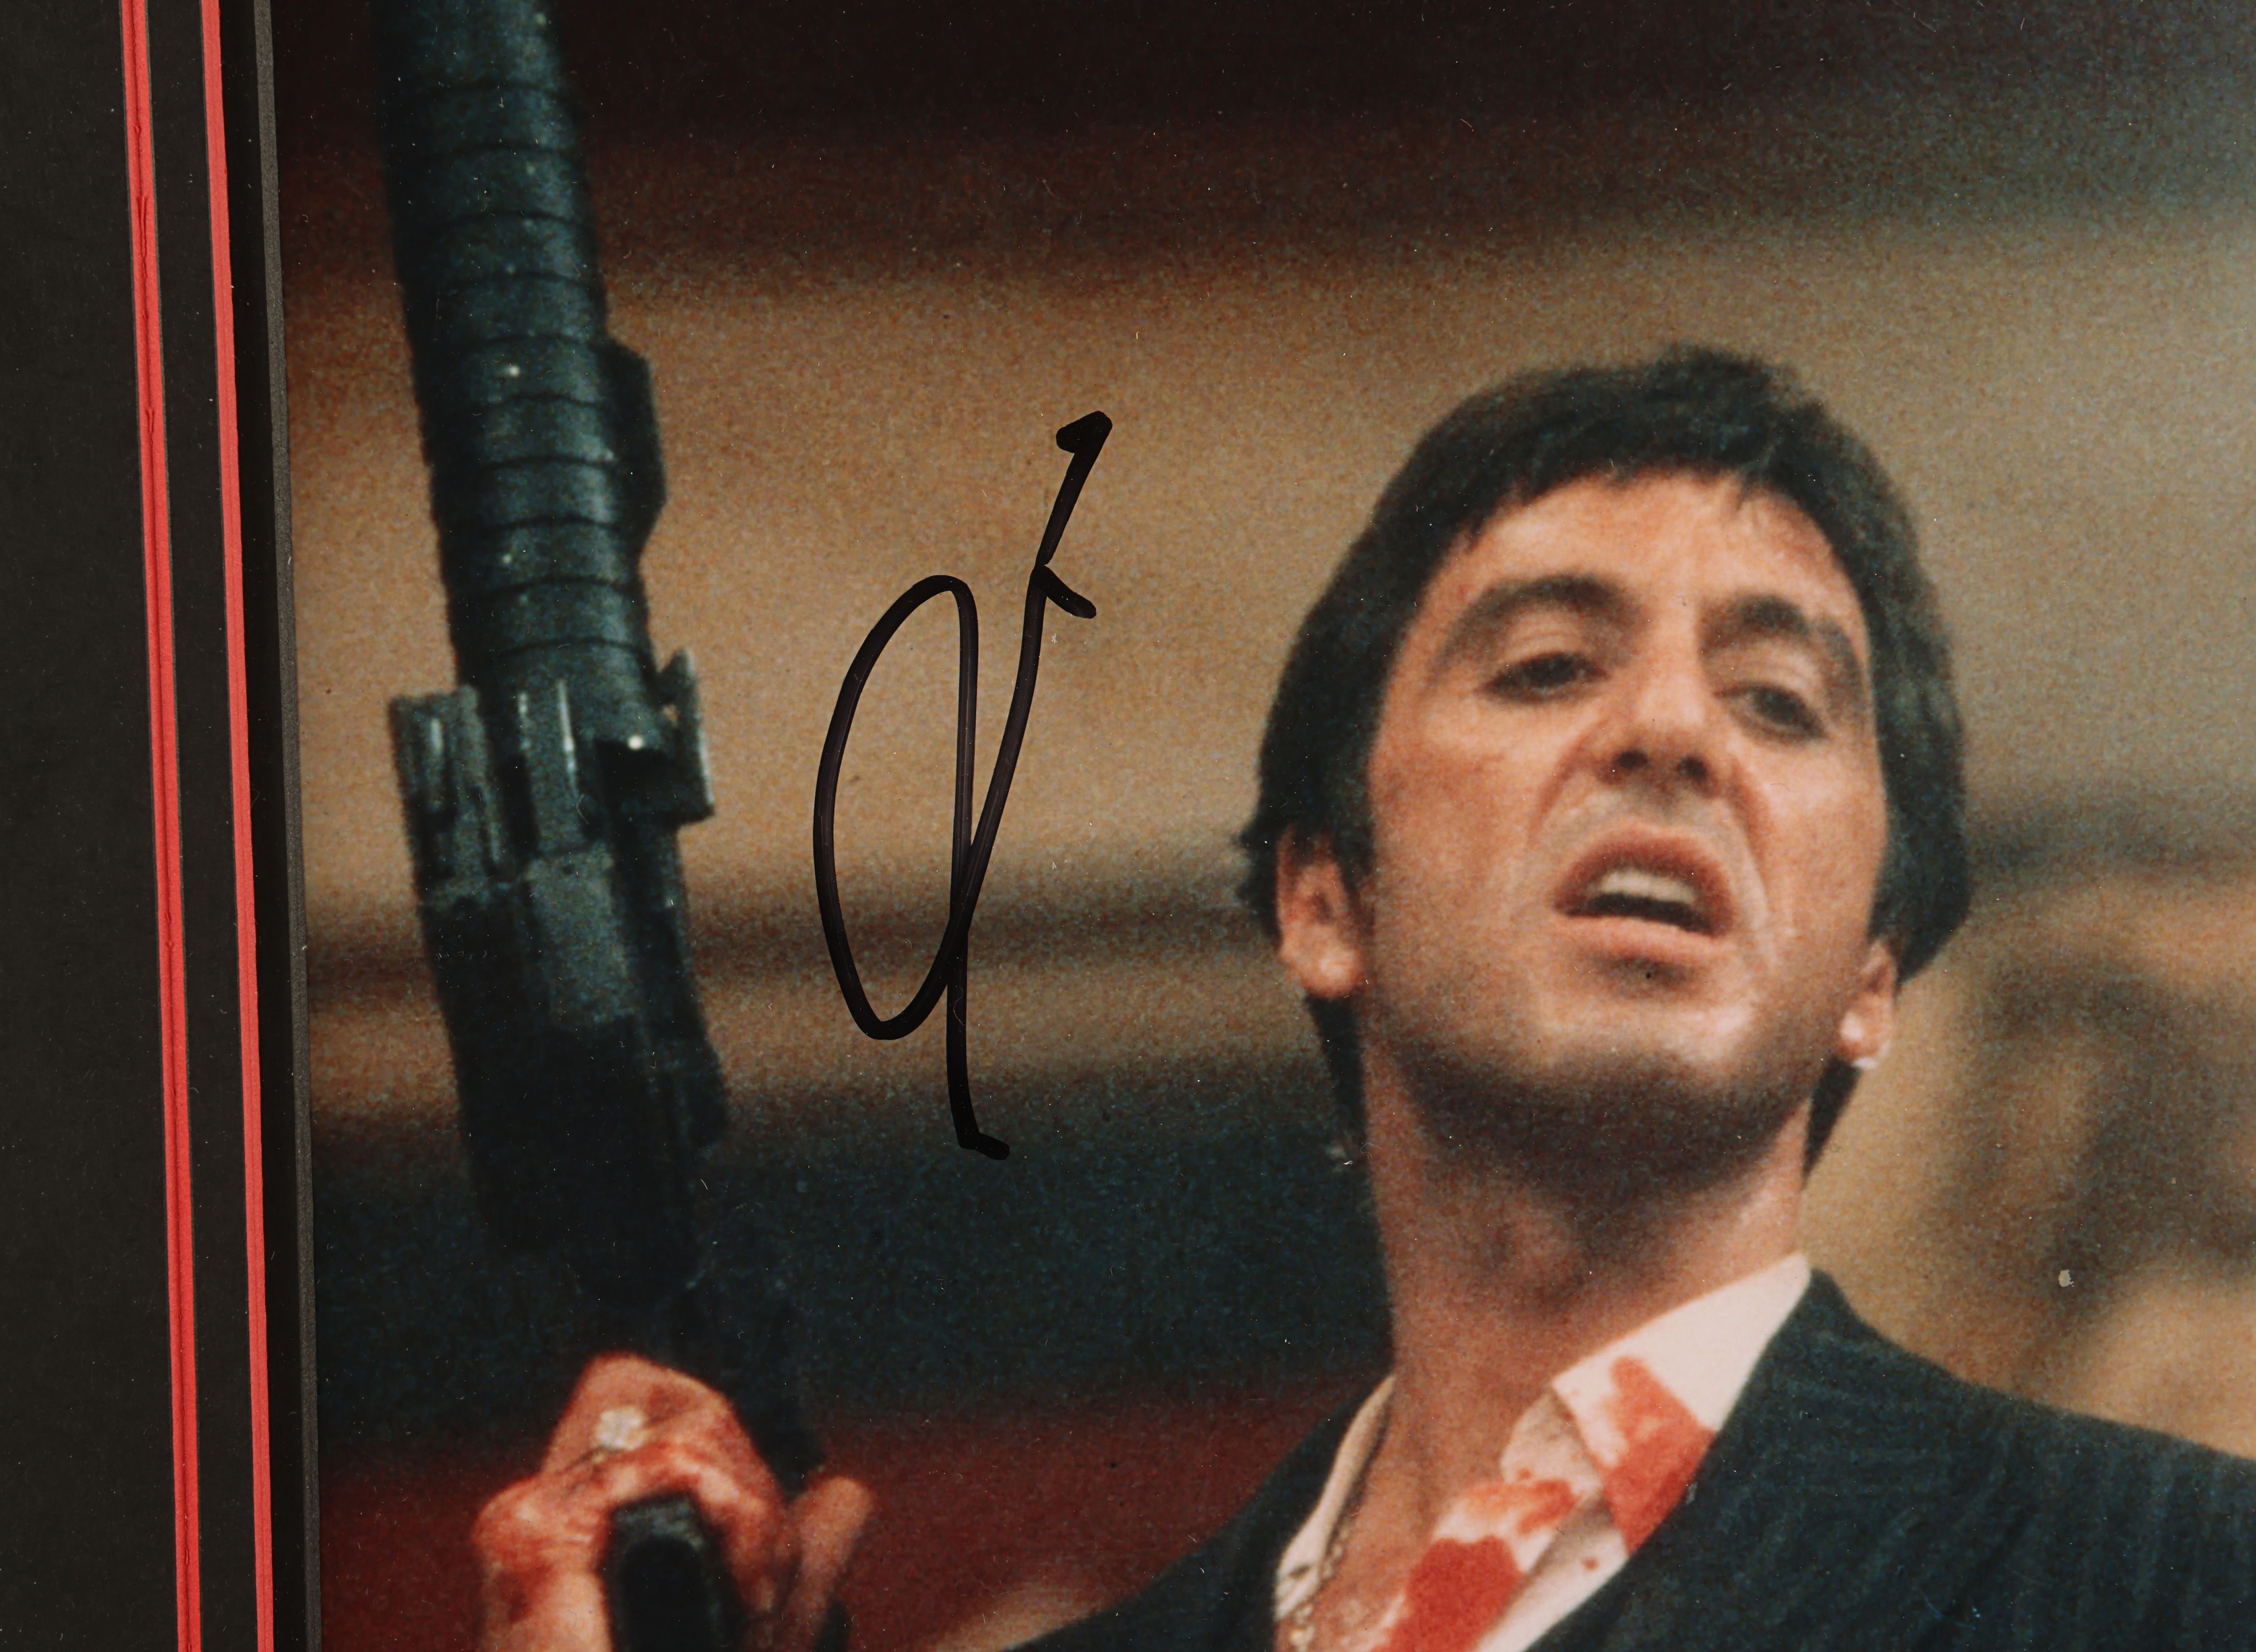 SCARFACE (1983) - Al Pacino Framed Autograph Display - Image 2 of 2